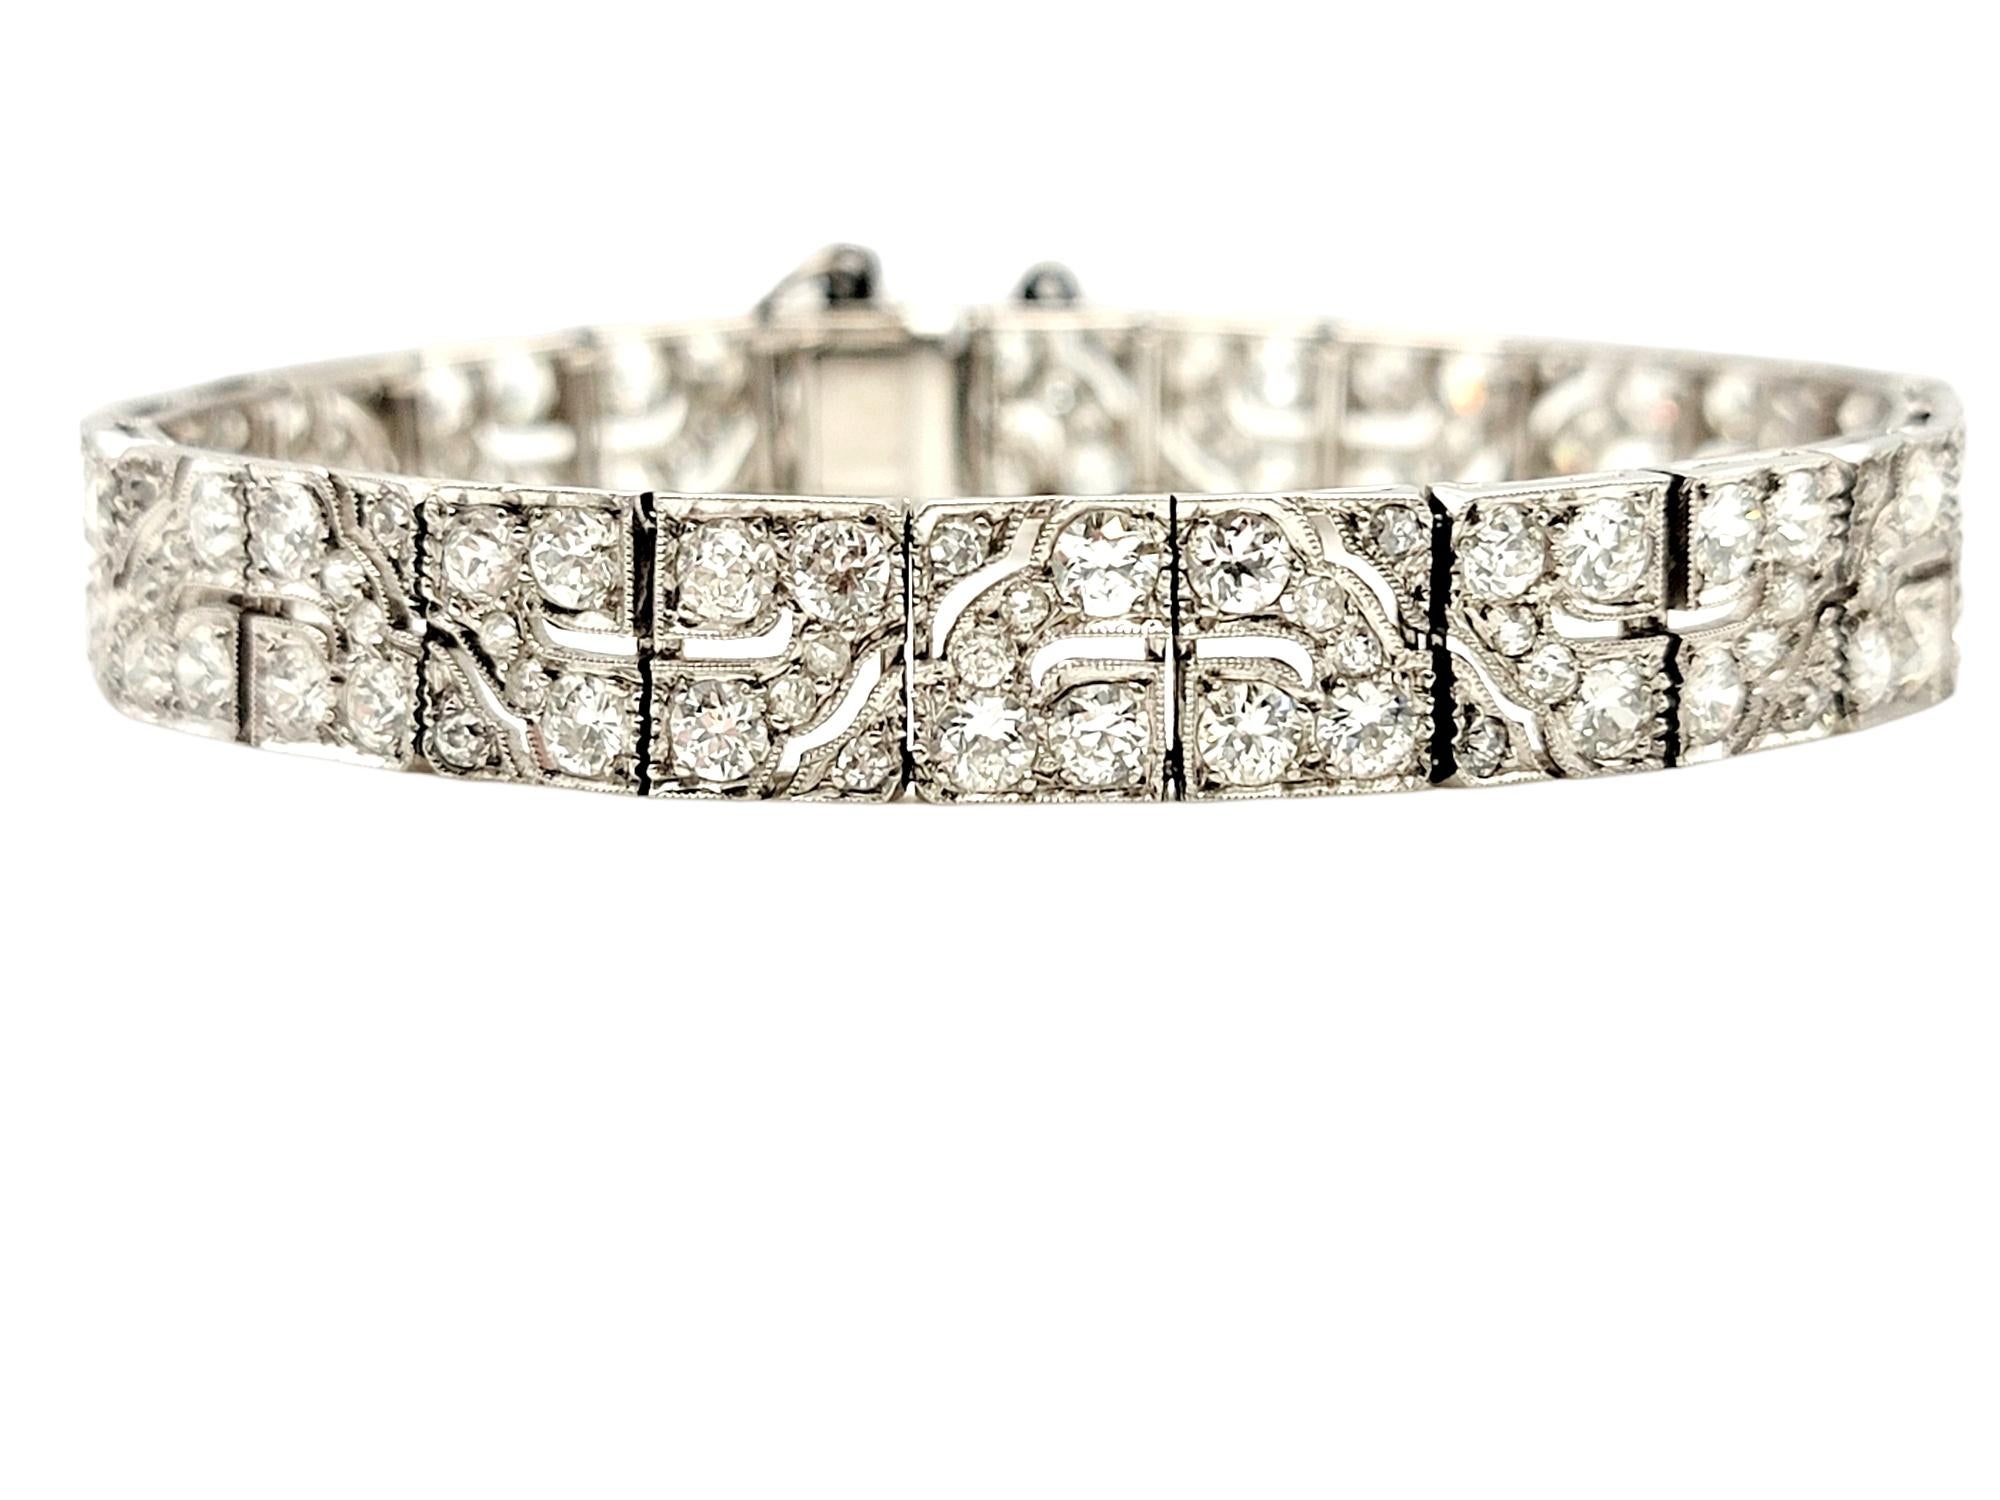 This magnificent Art Deco old European cut diamond bracelet brings vintage beauty to your modern life. 

This simply stunning bracelet features an incredible 8.40 carats total of sparkling natural diamonds, F-G-H in color, VS1-SI2 in clarity. There